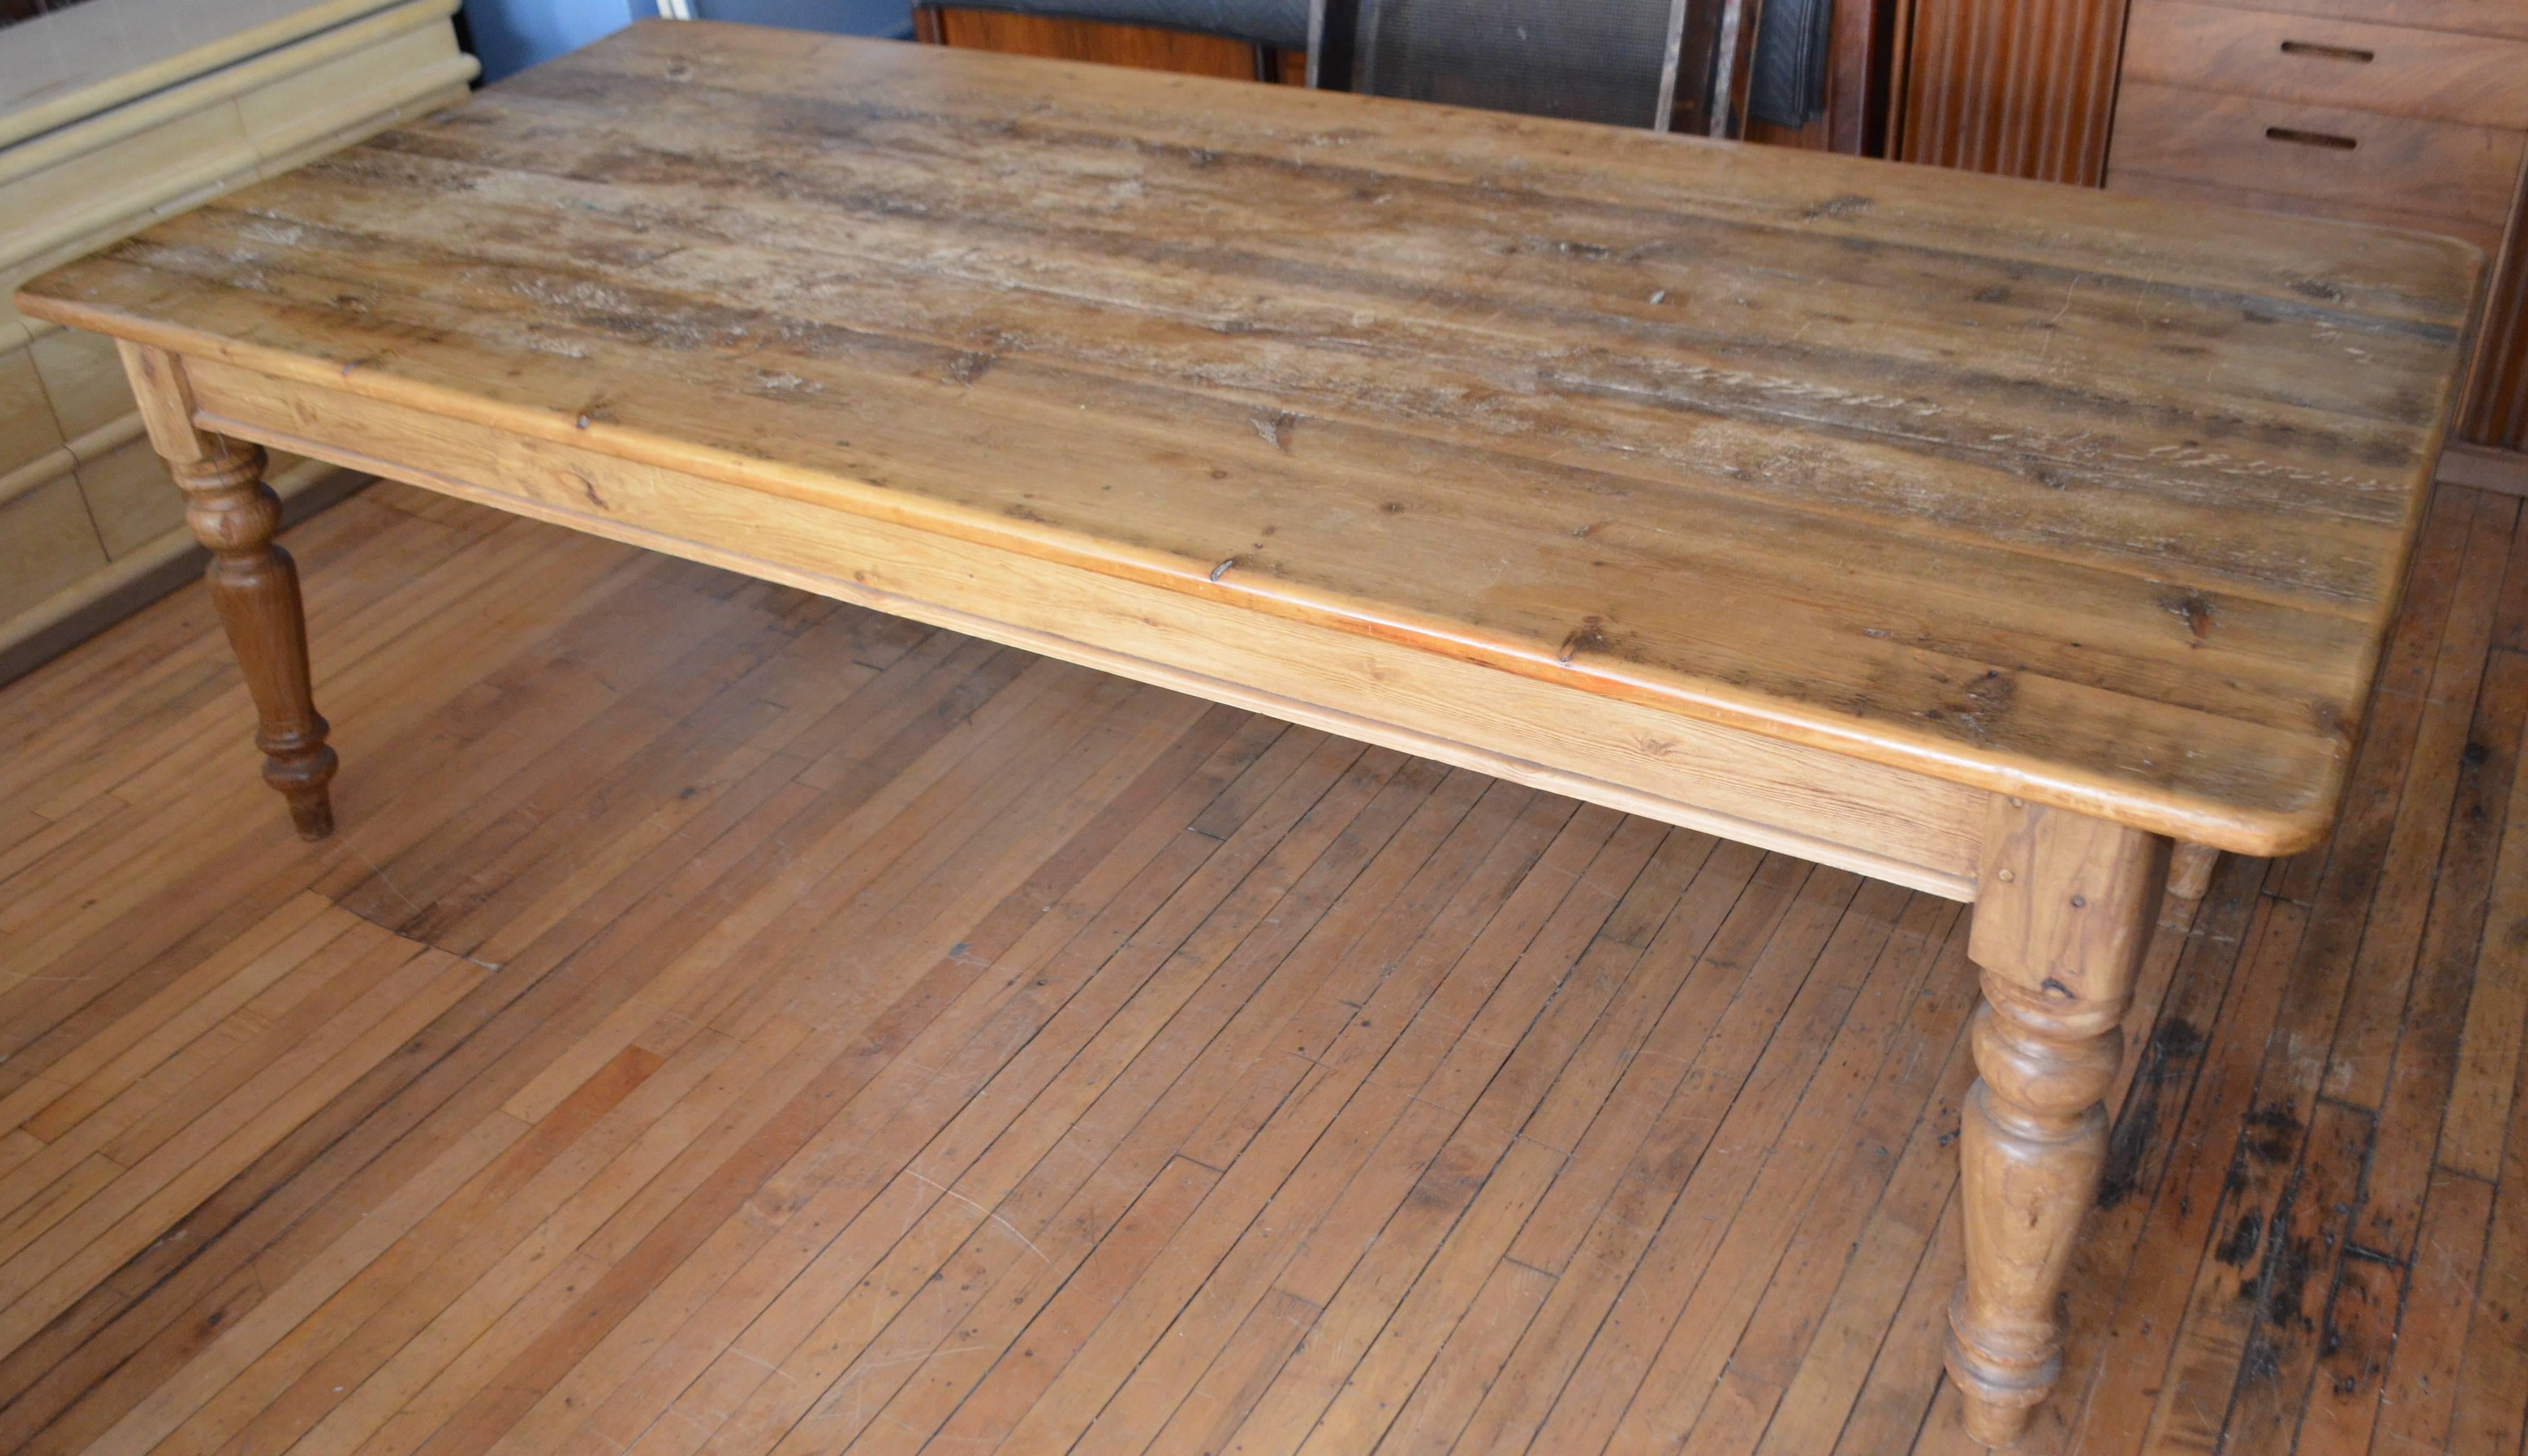 Farm table of pine with balustrade legs, circa 1890. Amazingly solid, sturdy with 8-foot length and a deep, expansive width of 43 inches. Pine board top has a rich patina of character and use. Several generations of a farm family sitting down to